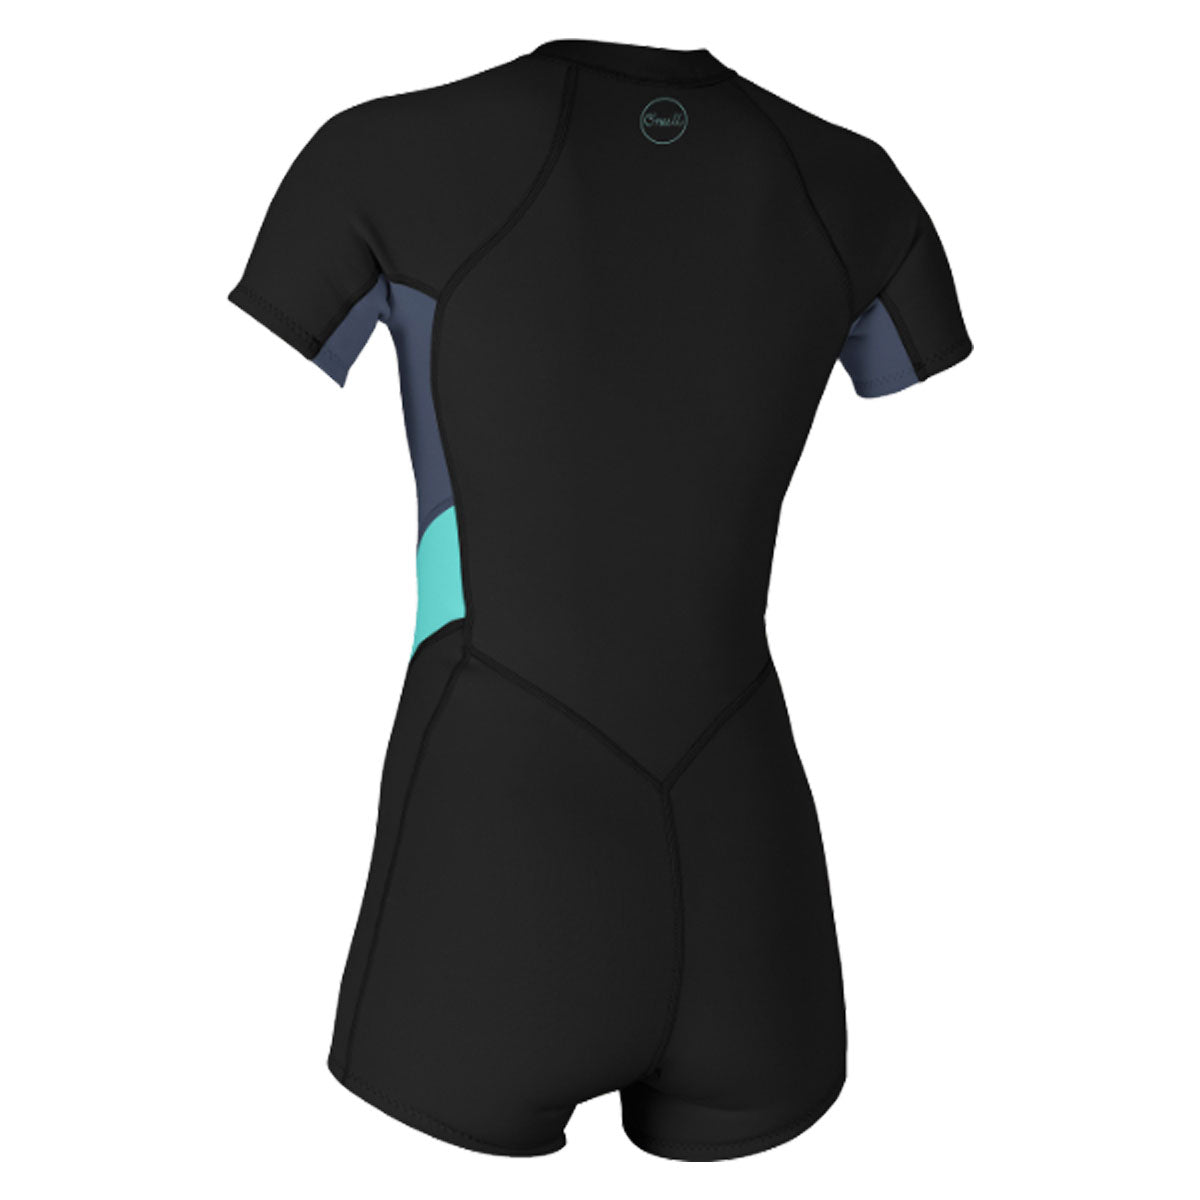 A women's black and turquoise O'Neill Women's Bahia 2/1 S/S Front Zip Spring Suit, perfect for the performance-driven athlete.